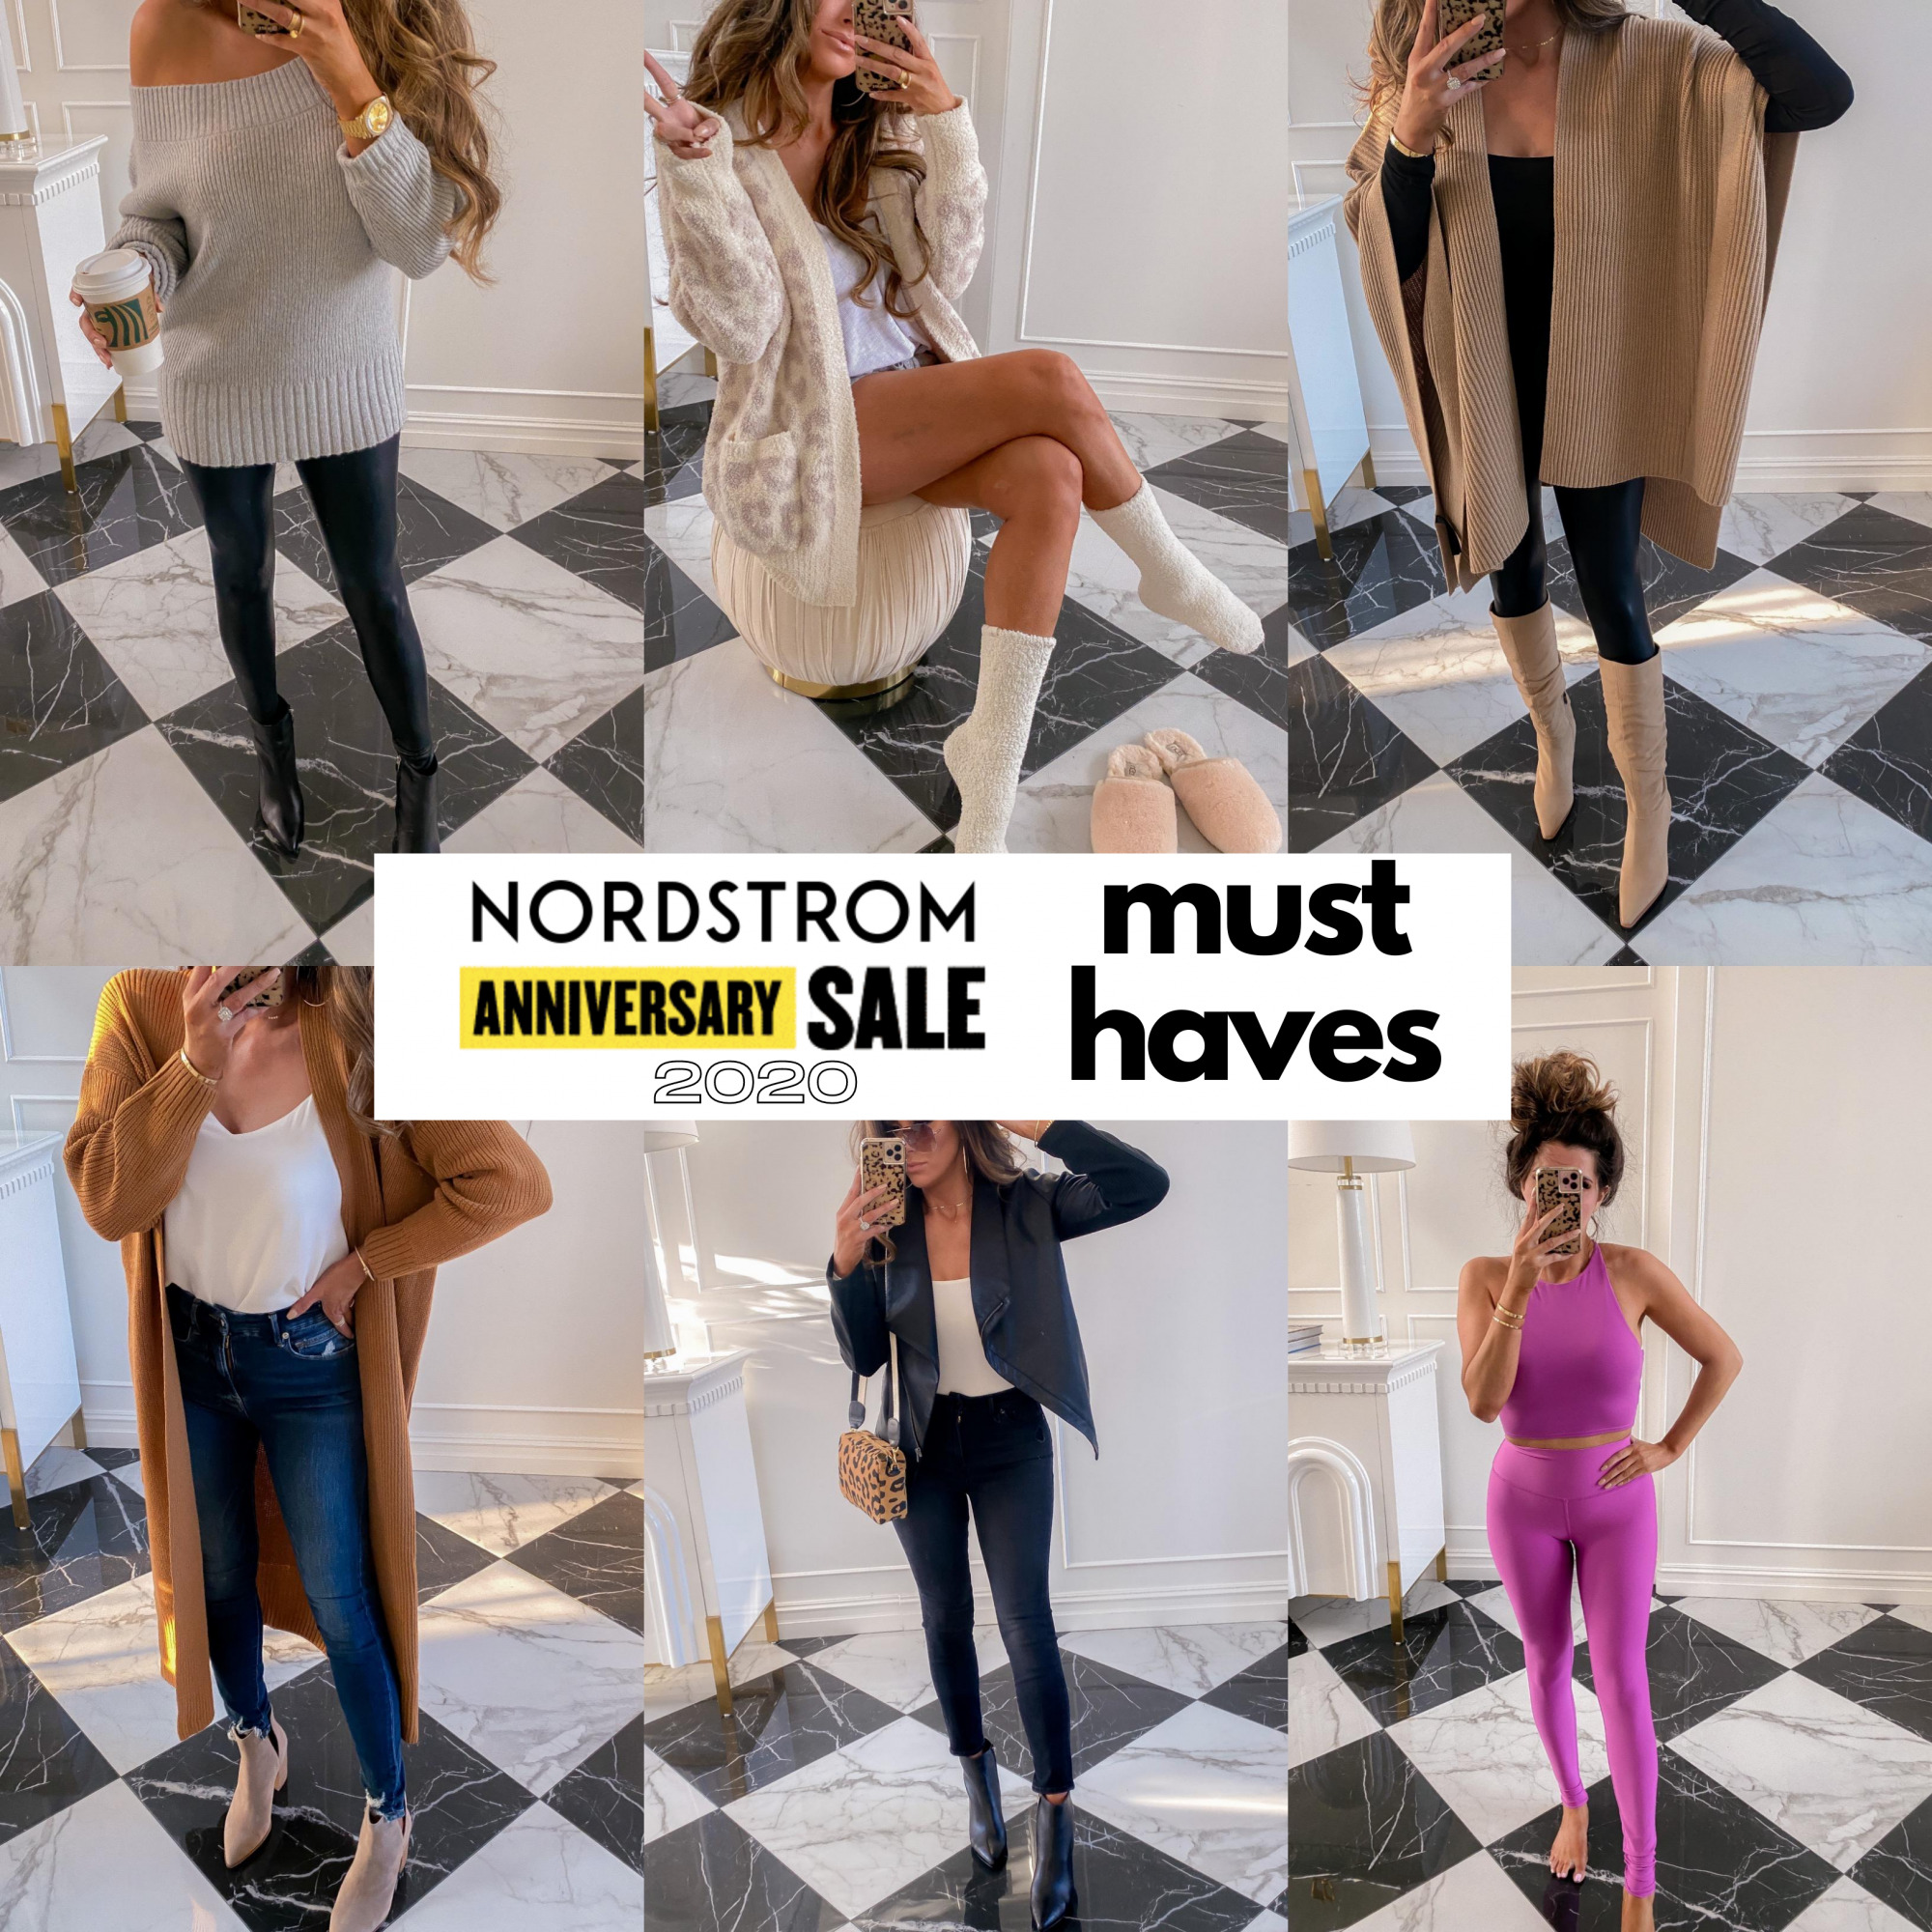 Nordstrom Anniversary Sale 2020 Try On, NSALE 2020 blogger picks, Nordstrom anniversary sale top picks must haves | Nordstrom Anniversary Sale by popular US fashion blog, The Sweetest Thing: collage image of Emily Gemma wearing Nordstrom cardigans, sweaters, jeans, leggings and boots. 